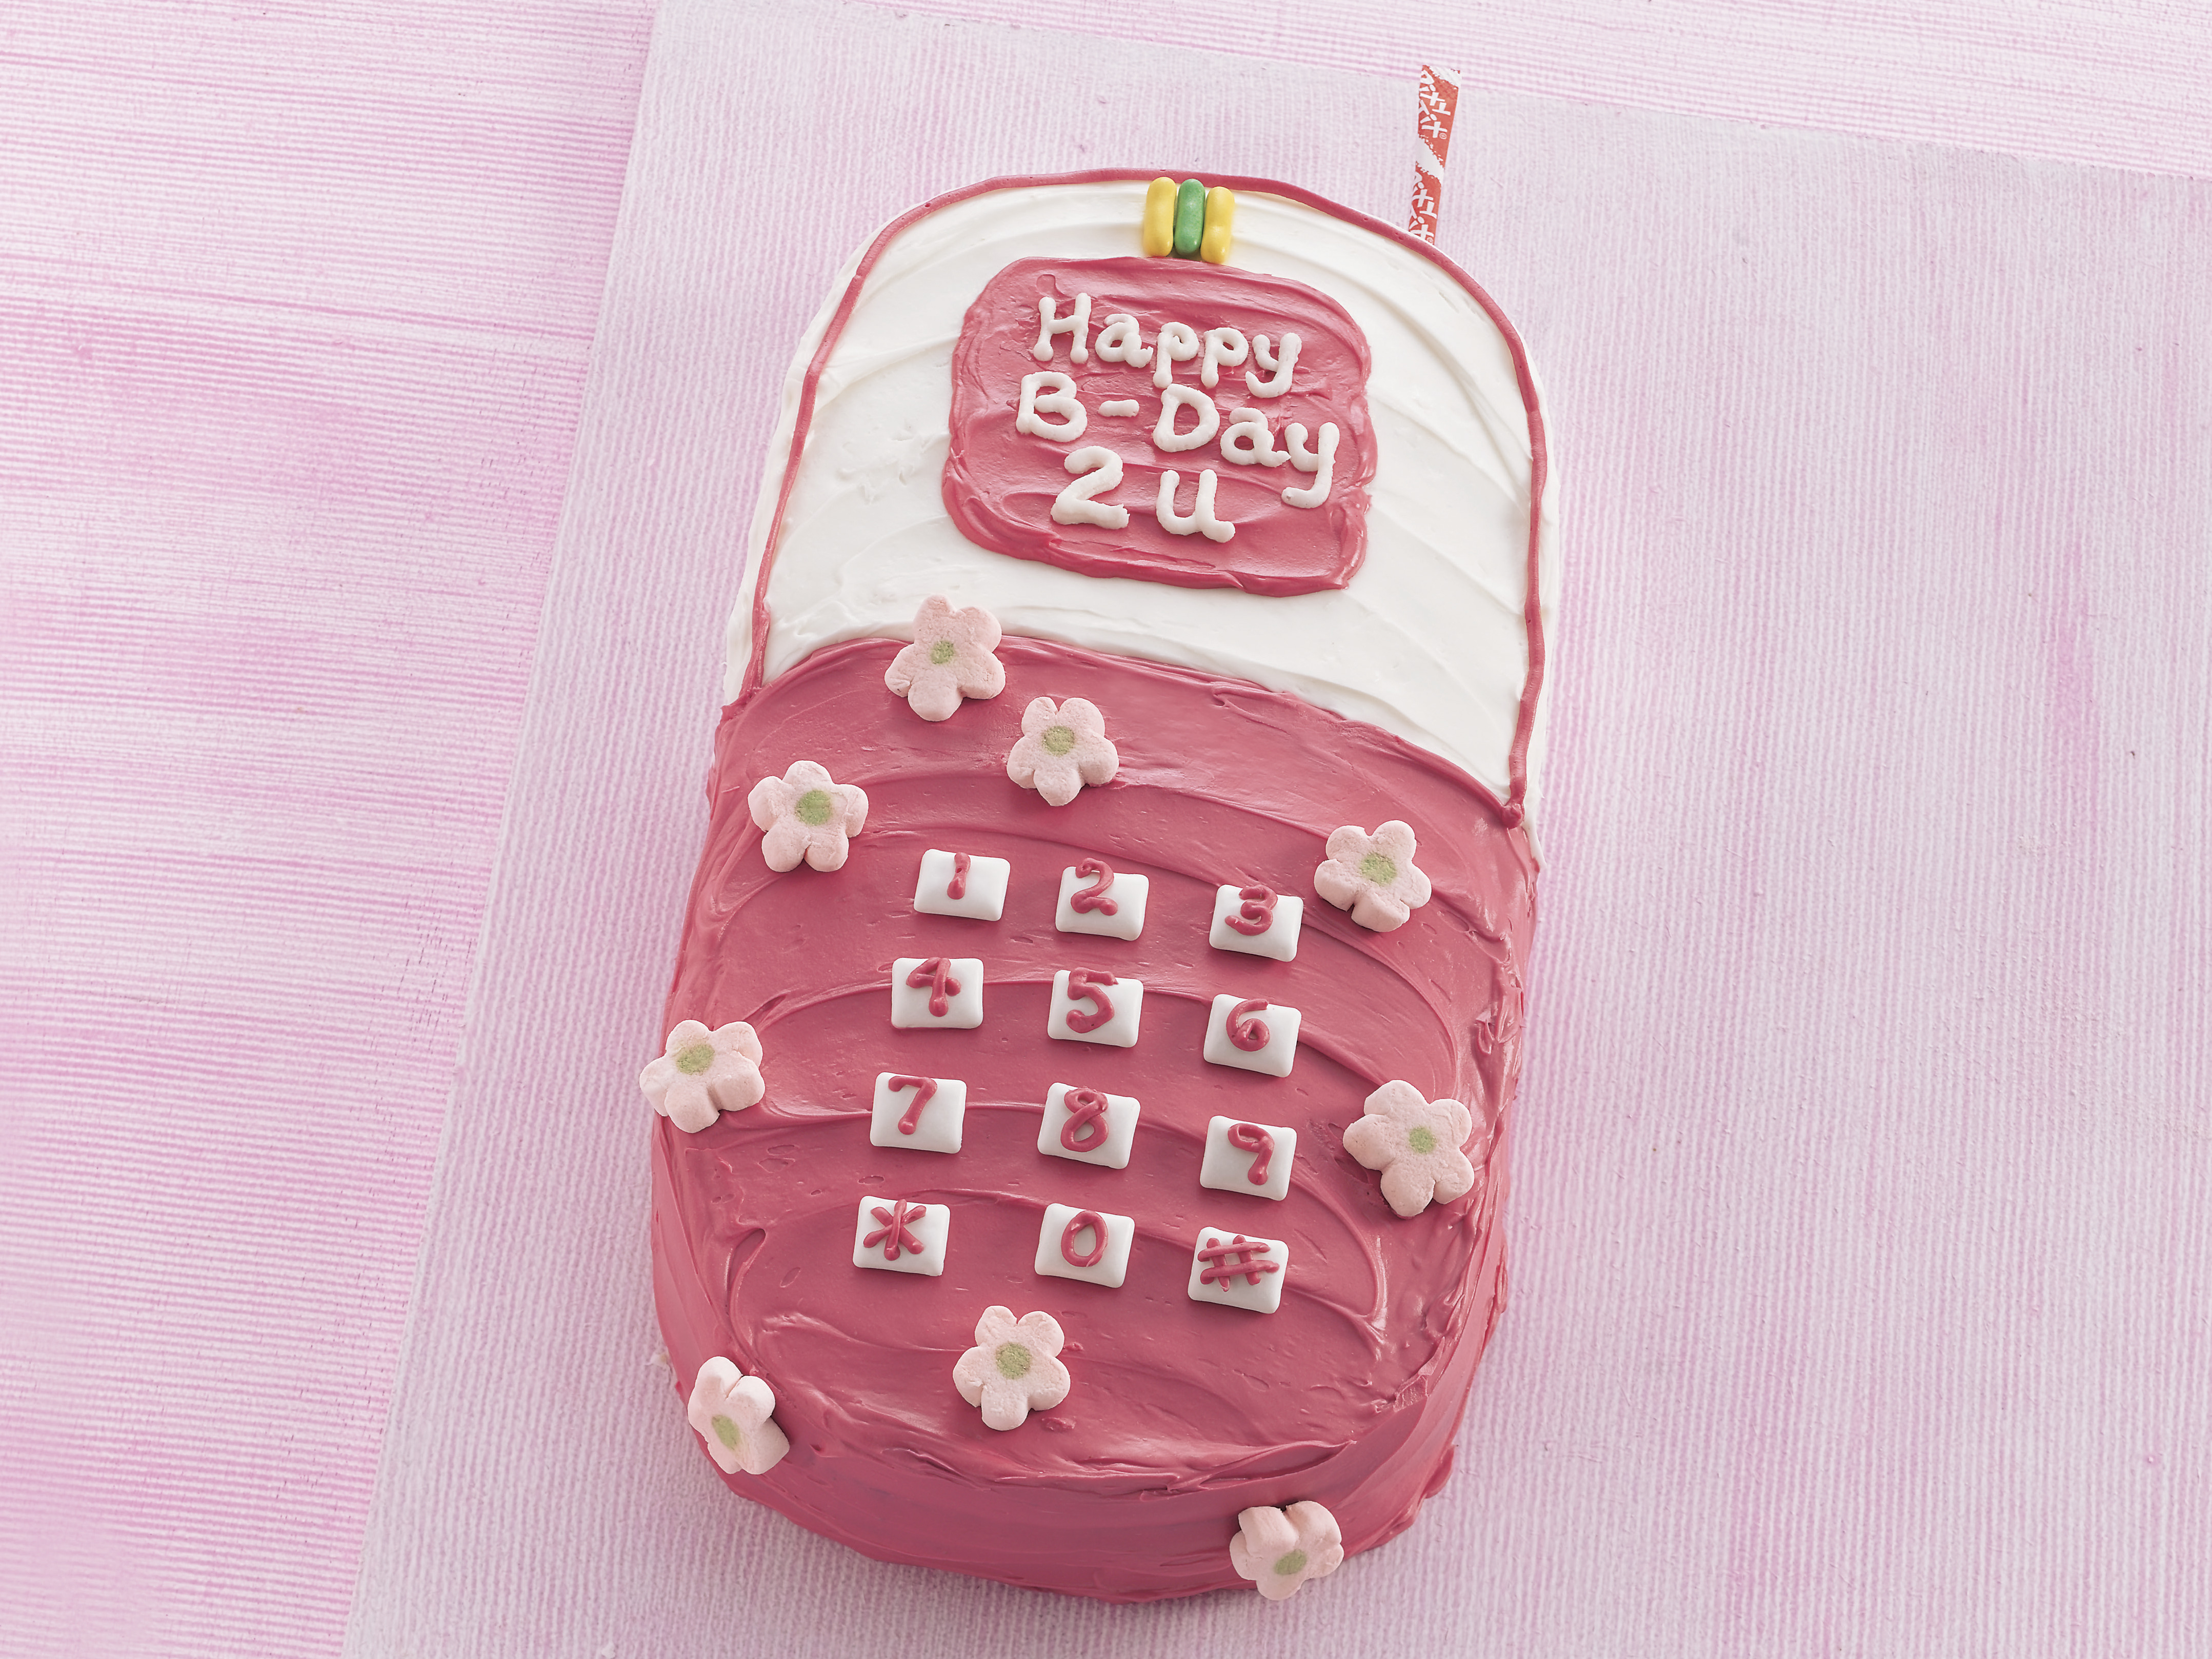 IPhone Cake Decoration Idea Recipe by Vicky@Jacks Free-From Cookbook -  Cookpad